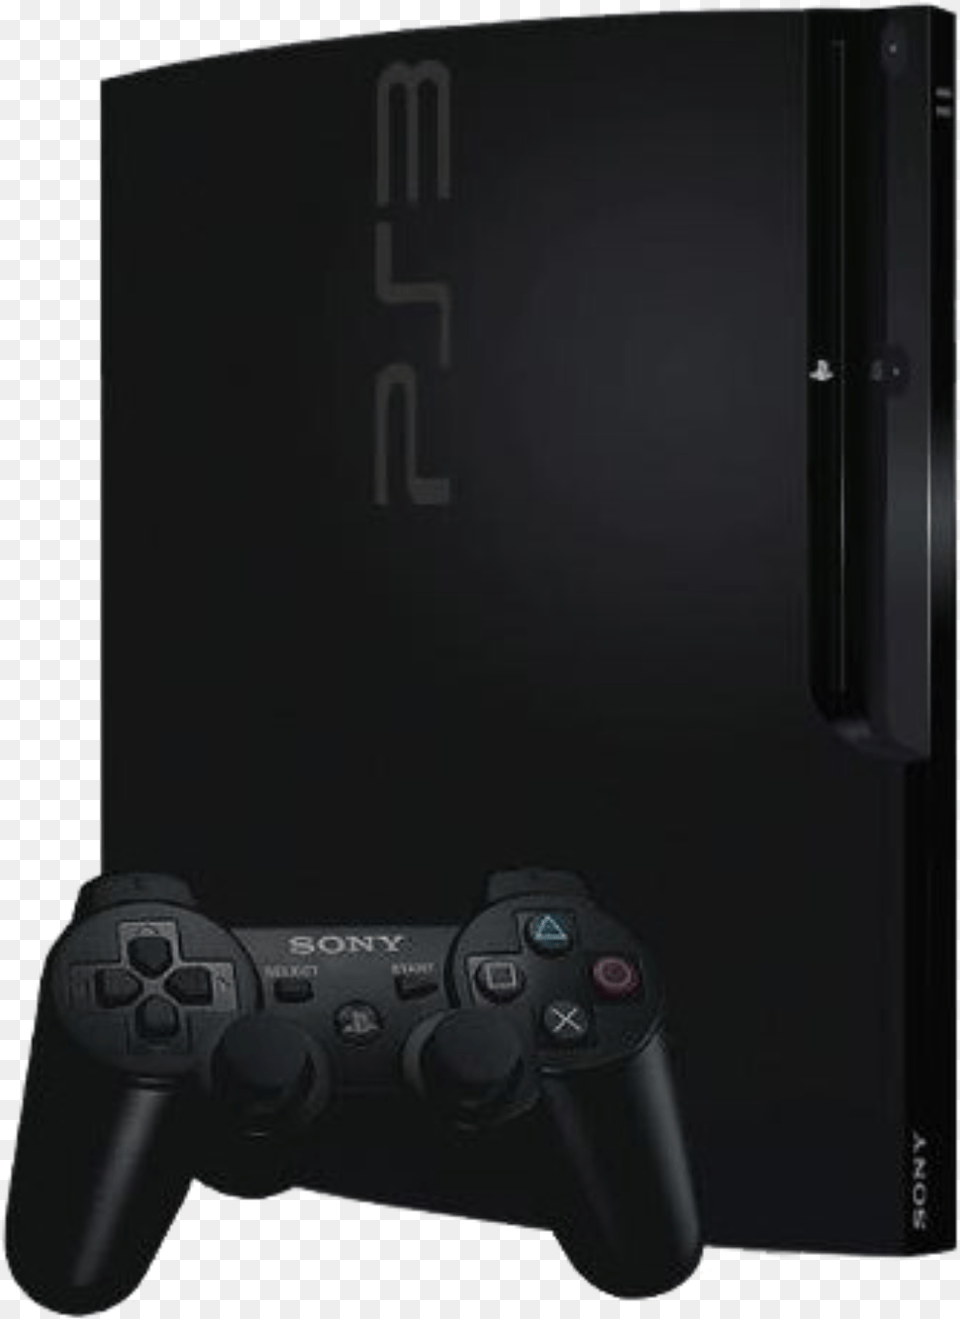 Sony Playstation 3 Slim Console Playstation 3 Slim, Electronics, Screen Free Png Download